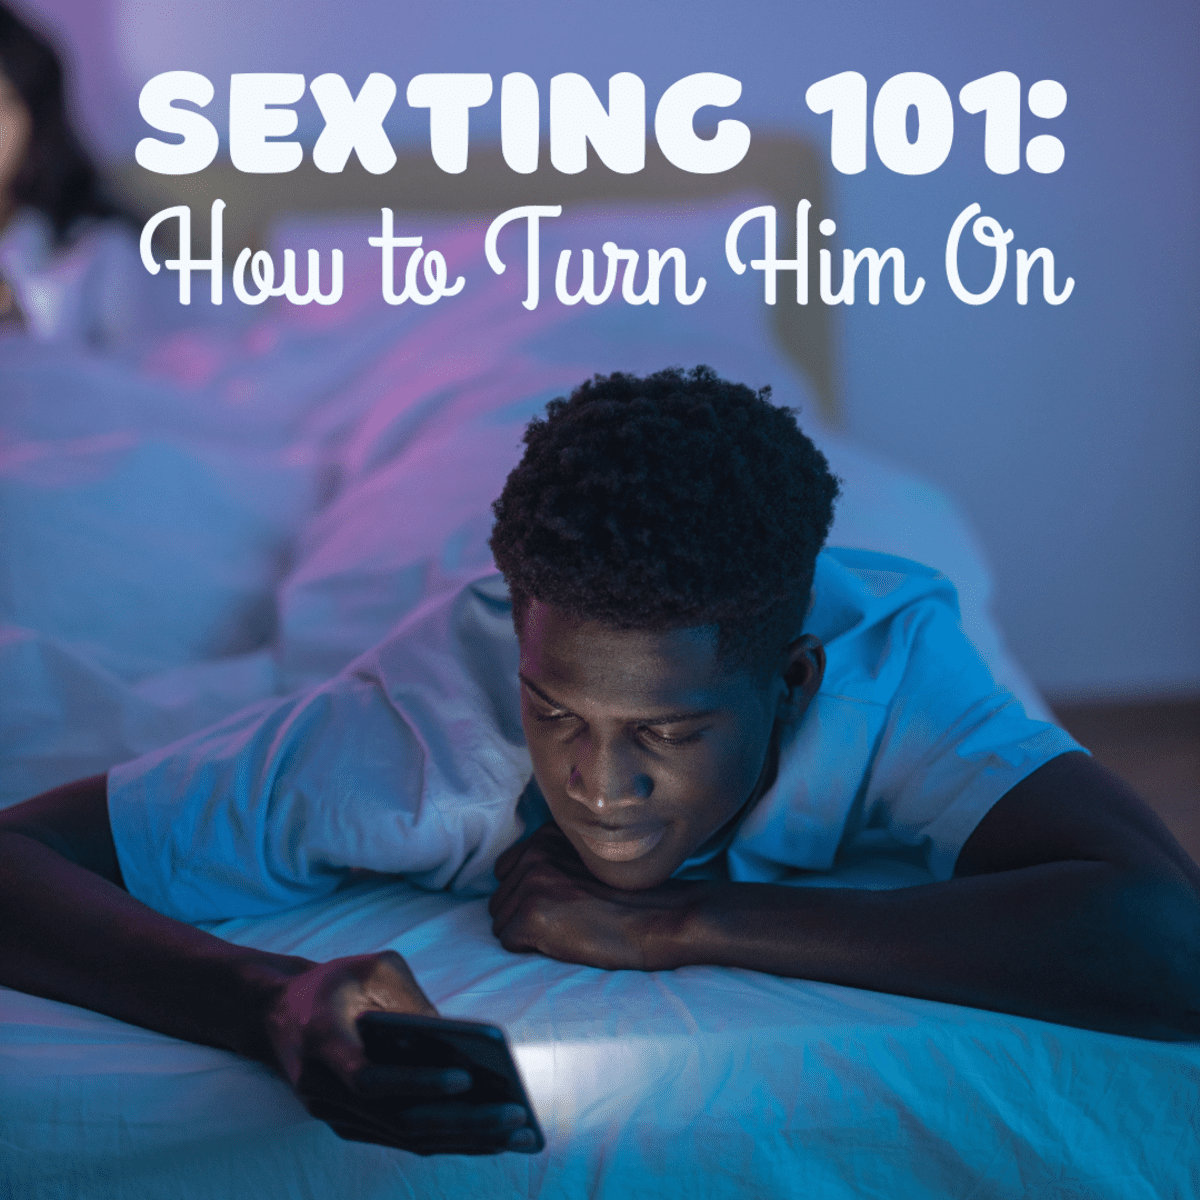 What to say to your man while making love